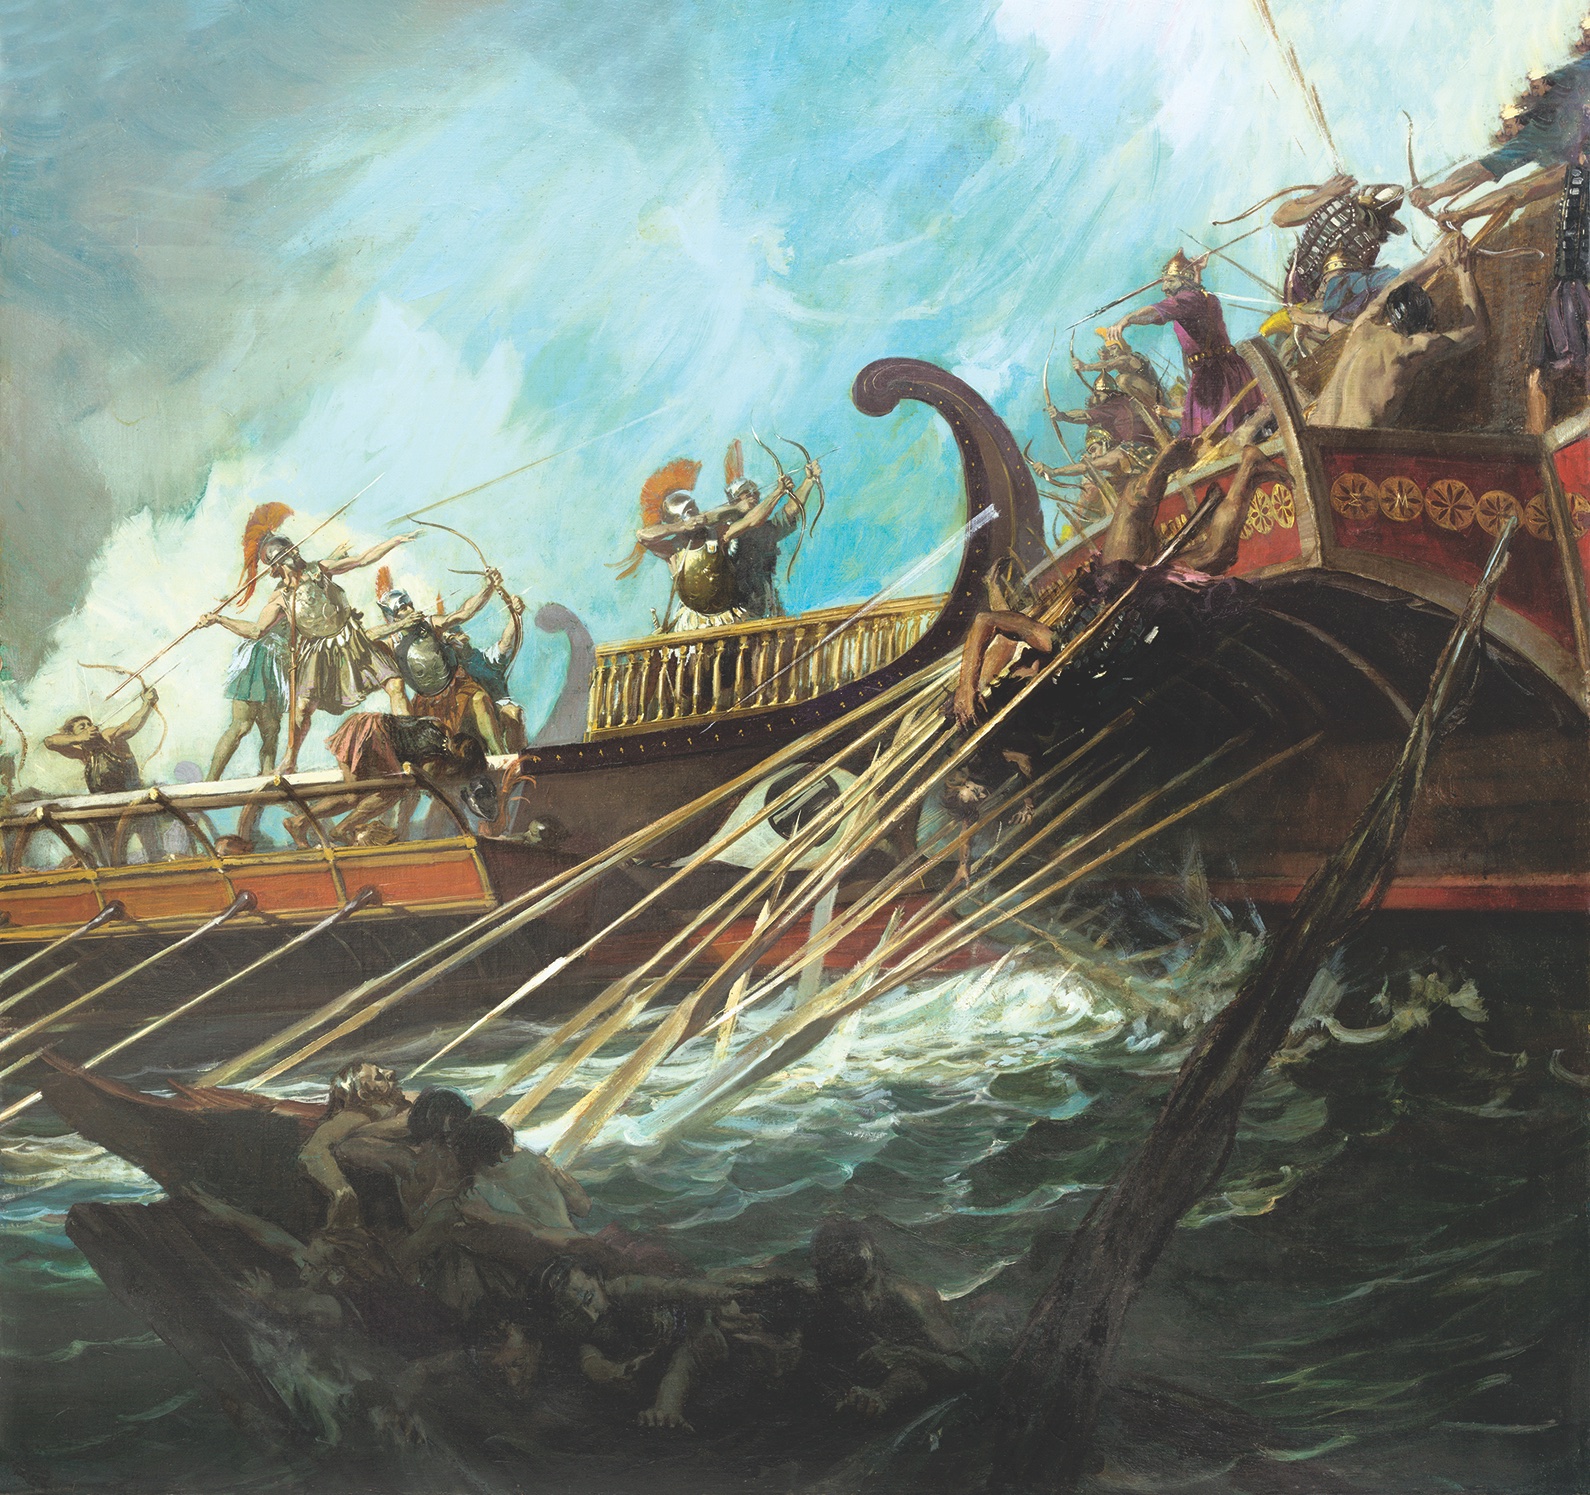 In 480 bce, on the heels of their defeat at Thermopylae, the Greeks brought the war to an end with an improbable naval victory in the Battle of Salamis. (Silverfish Press/National Geographic Image Collection/ Bridgeman Images) 